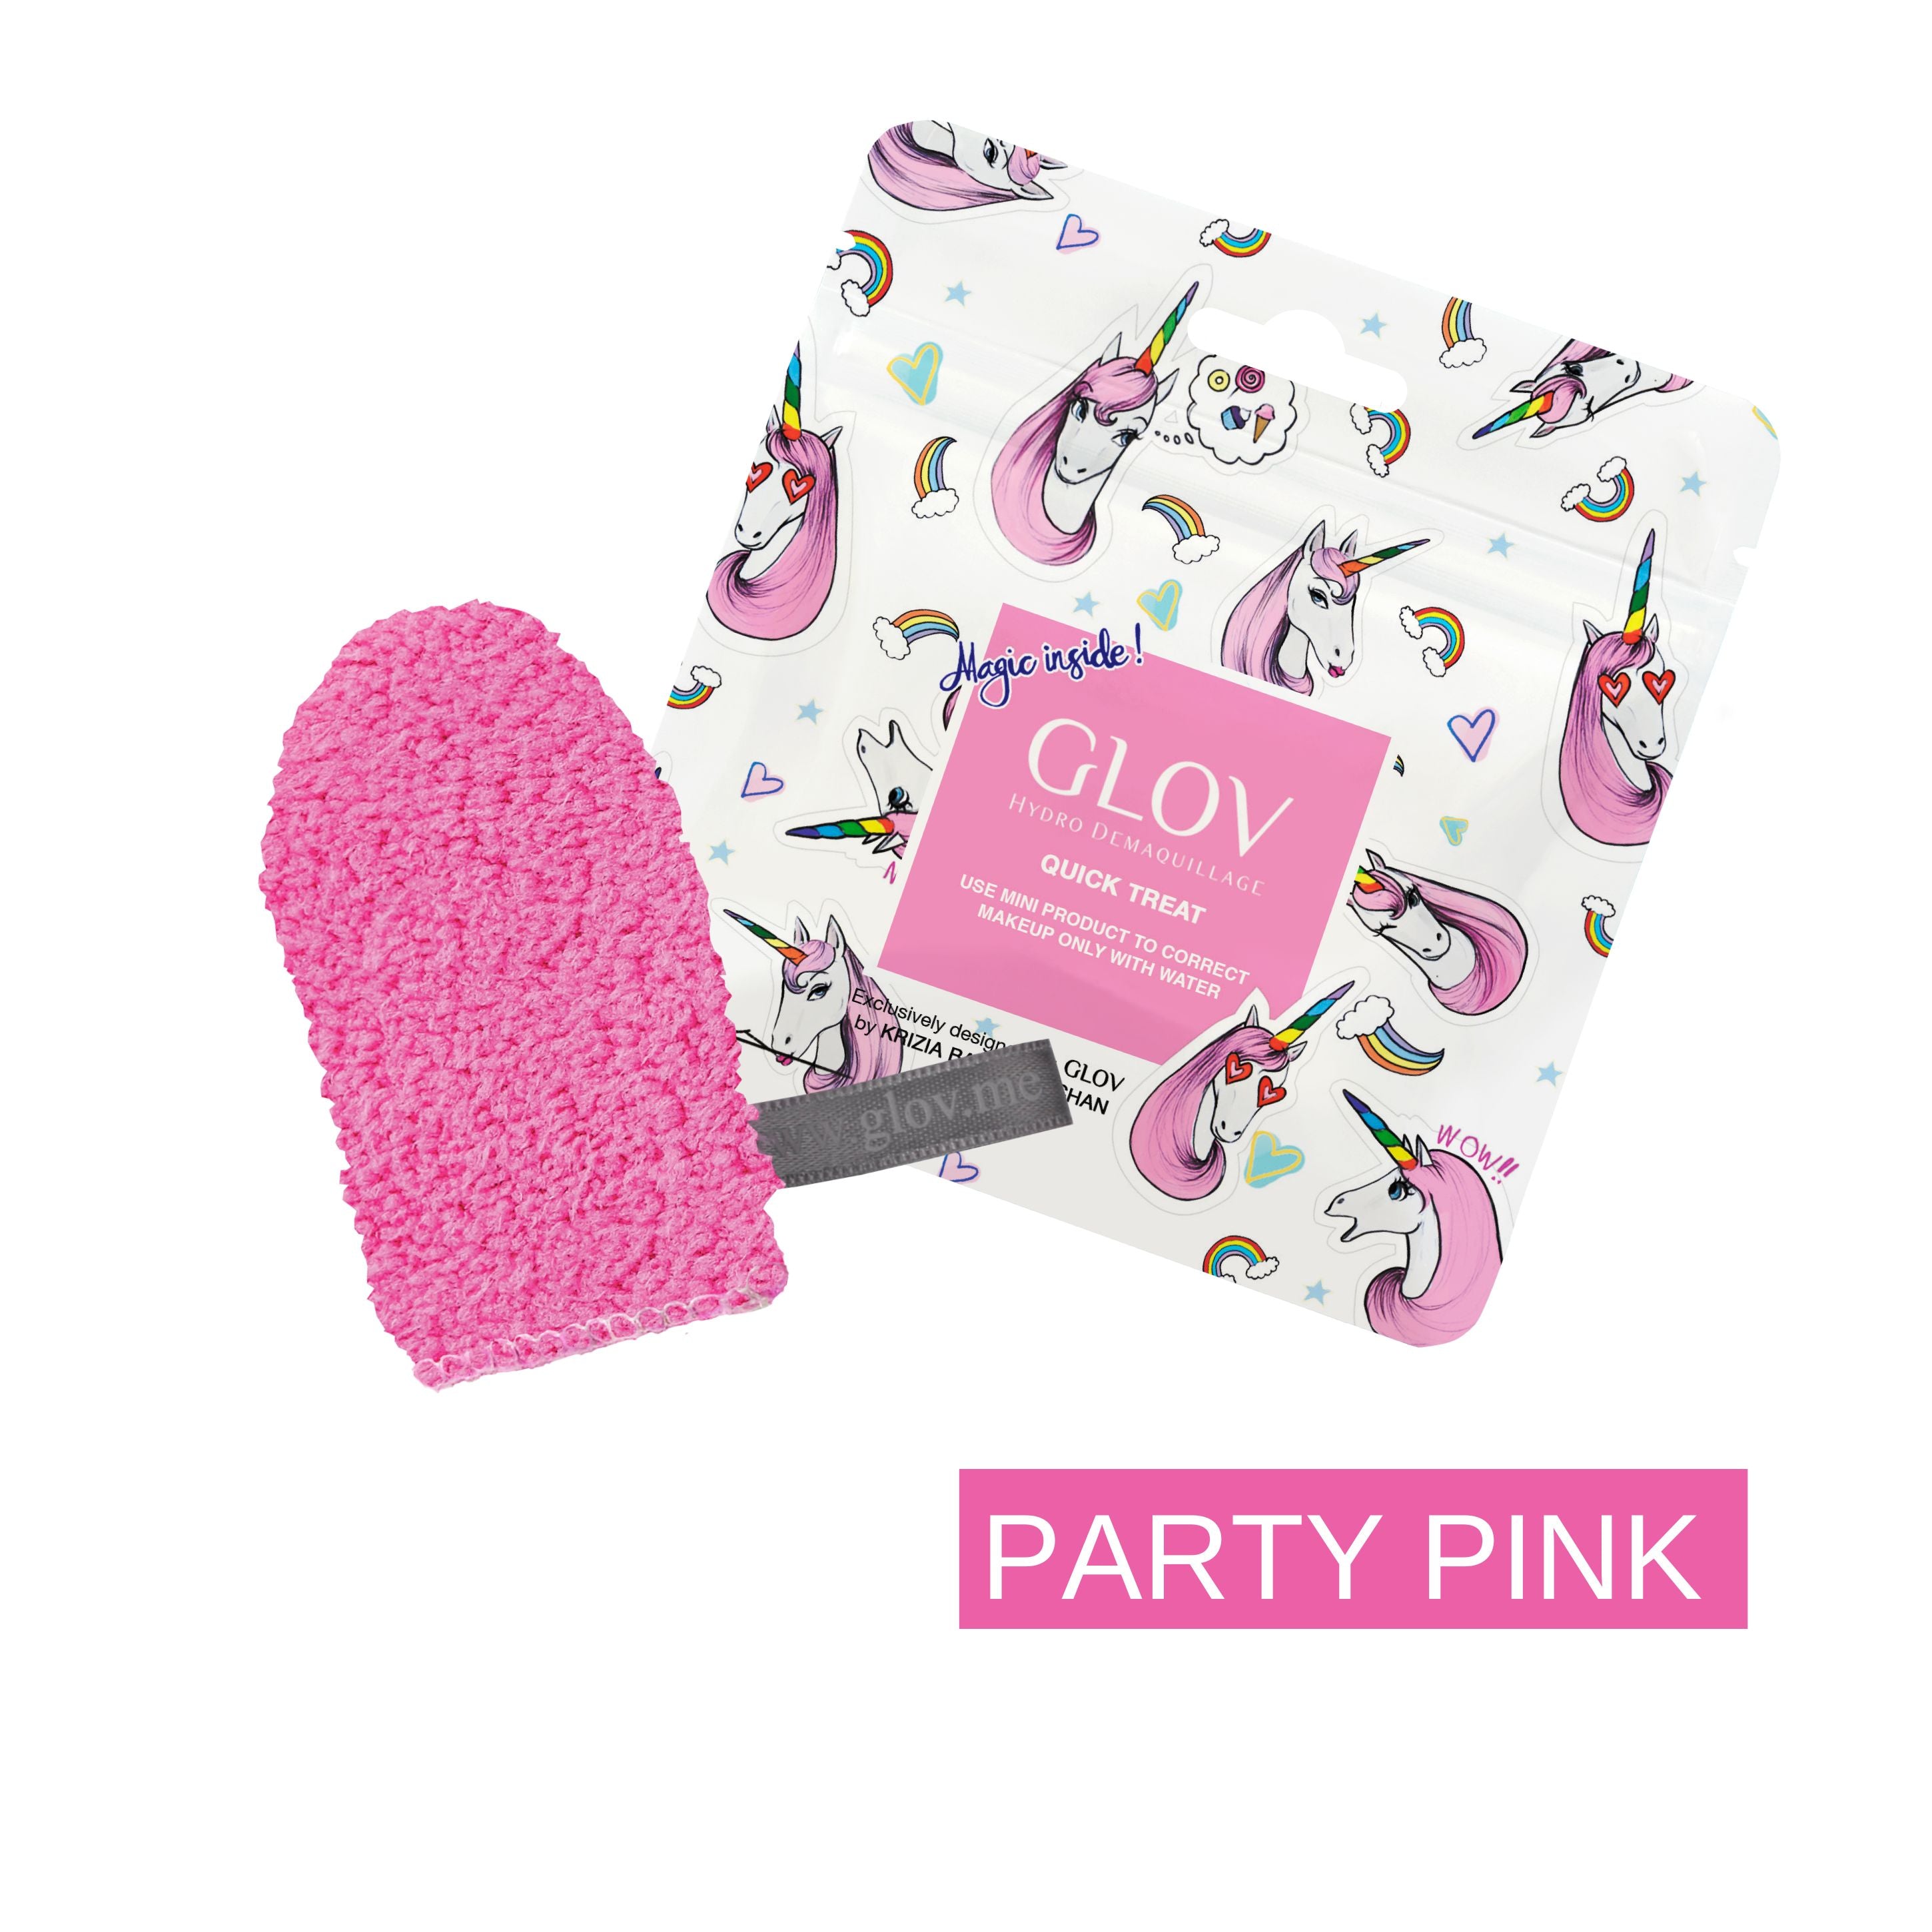 18. GLOV Quick Treat Party Pink